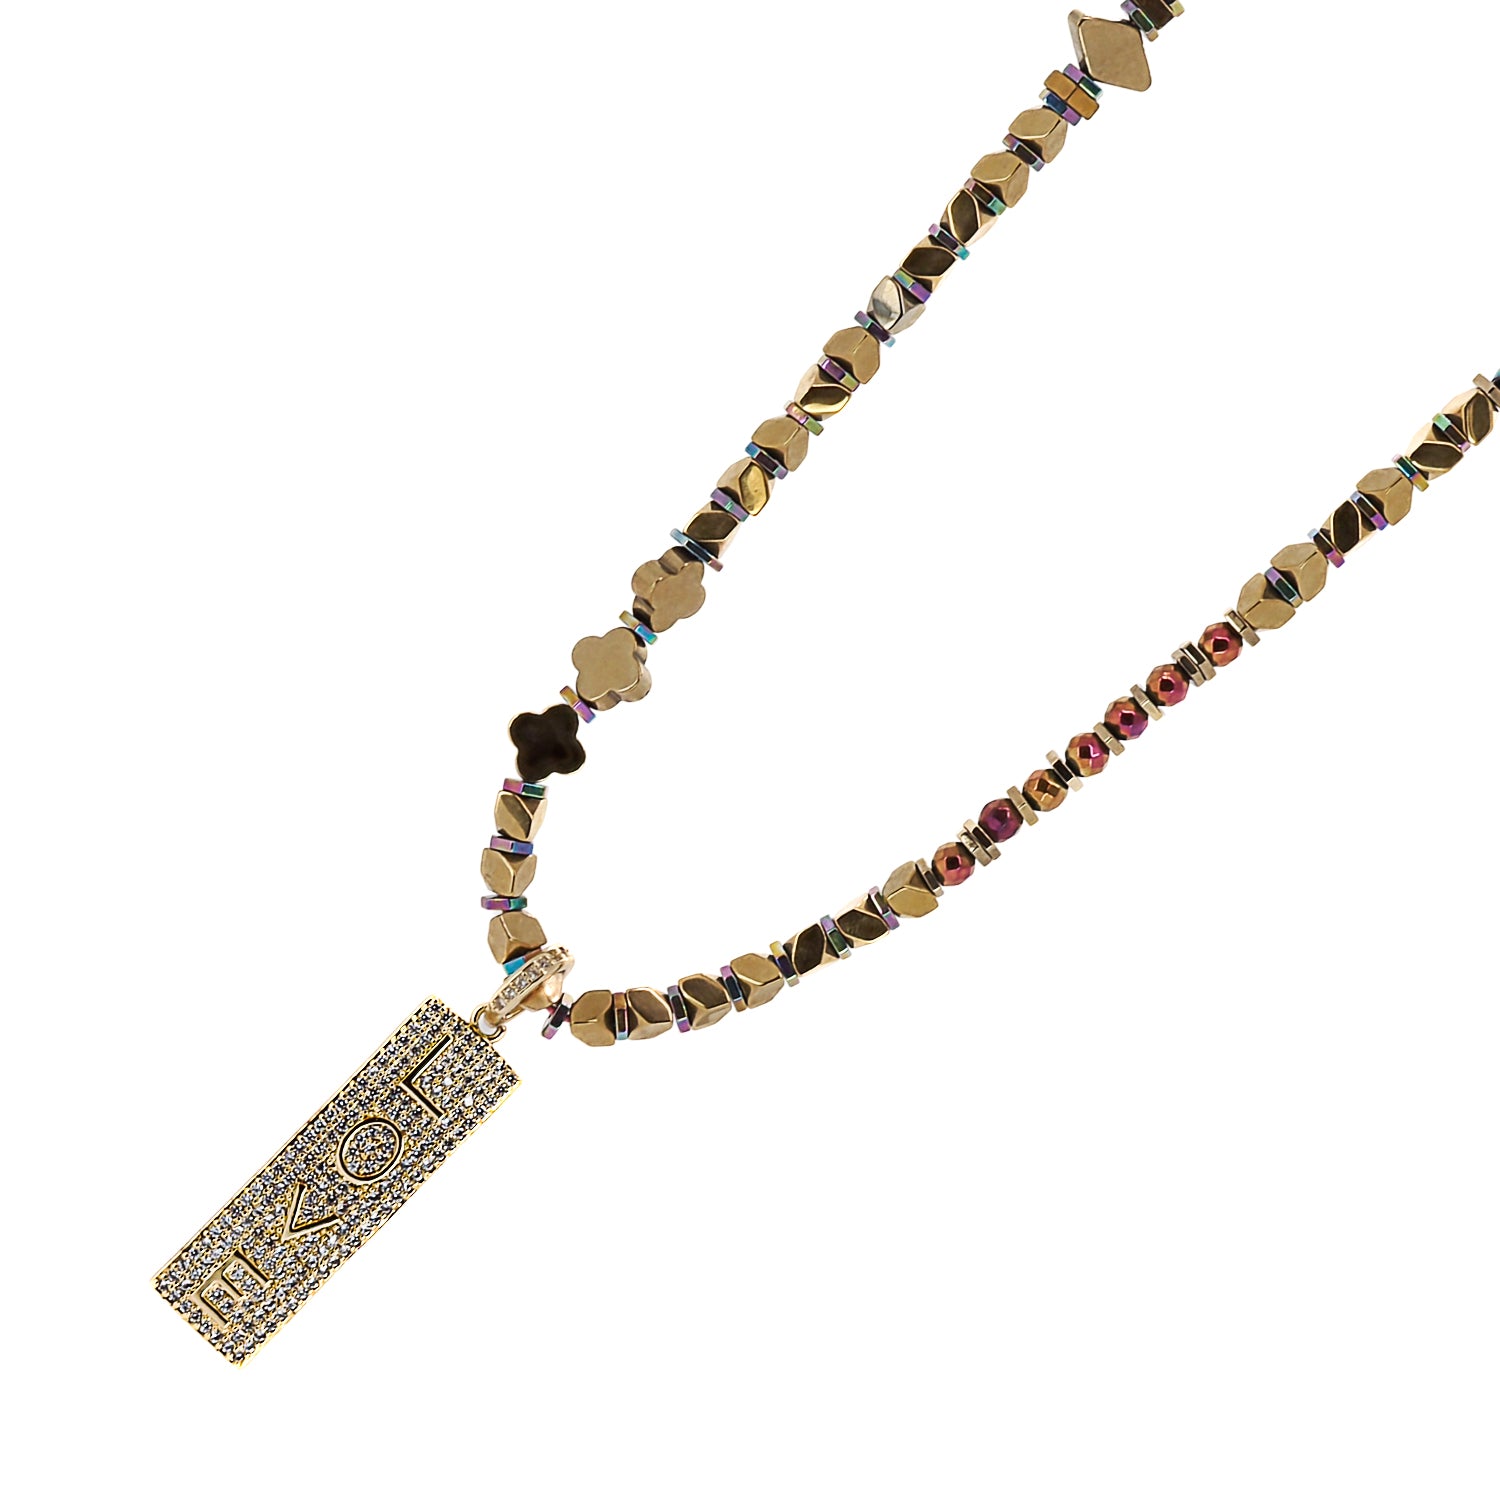 Symbolizing Love and Connection. The necklace incorporates multicolor hematite heart beads, symbolizing love and connection, further enhancing its sentimental significance.